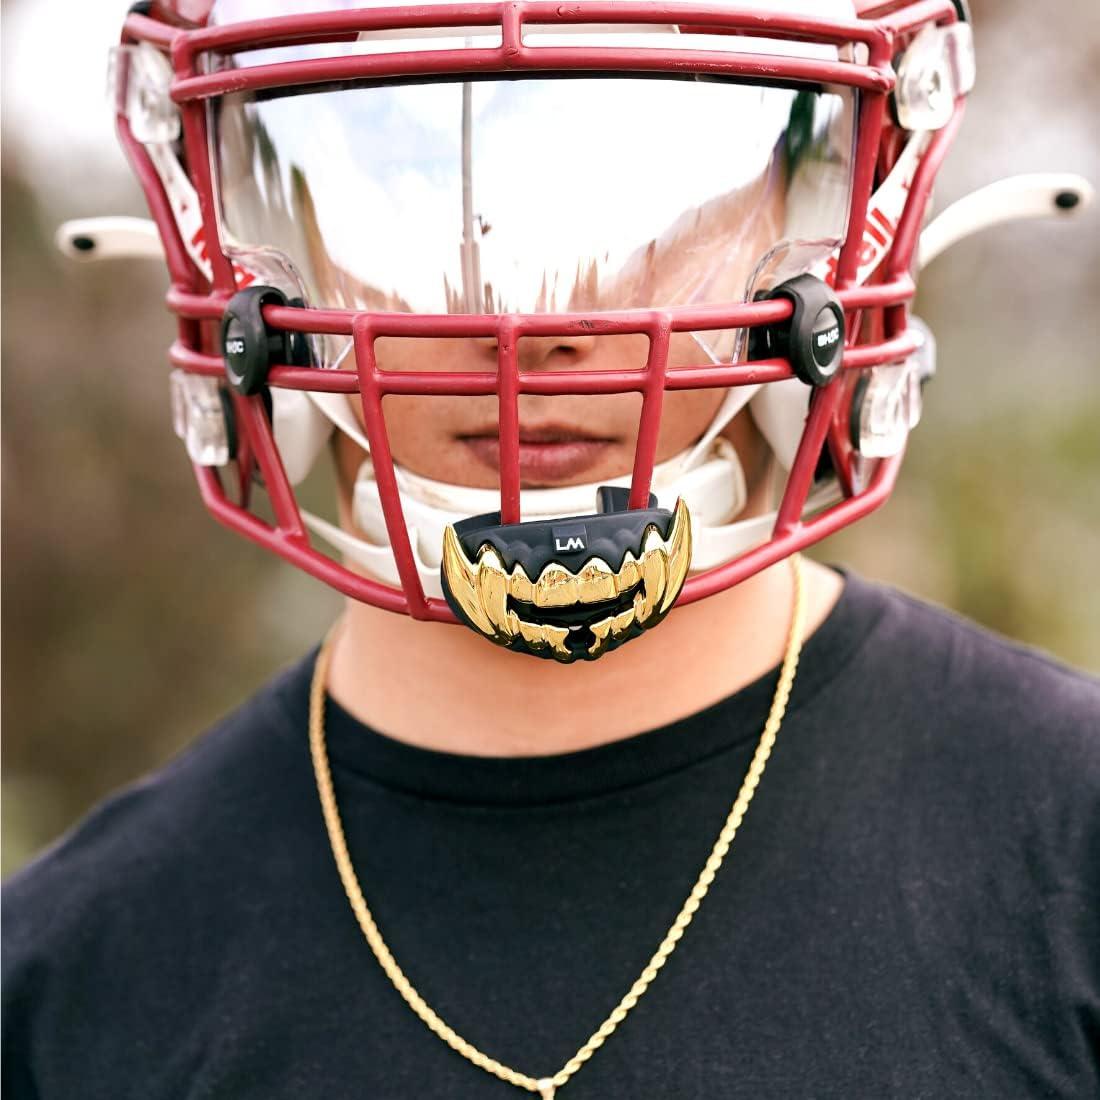 Loudmouth Football Mouth Guard - 3D Bling Chrome Grillz Football